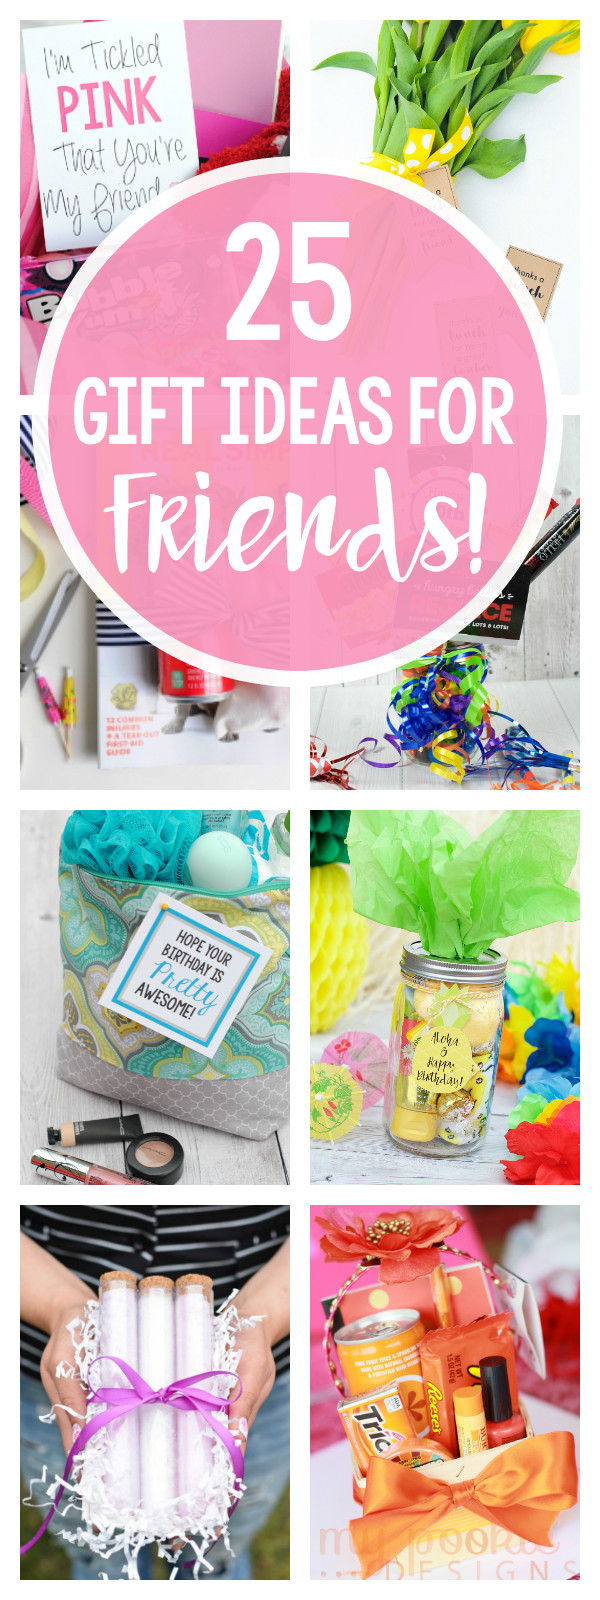 Funny Gift Ideas For Best Friend
 25 Fun Gifts for Best Friends for Any Occasion – Fun Squared